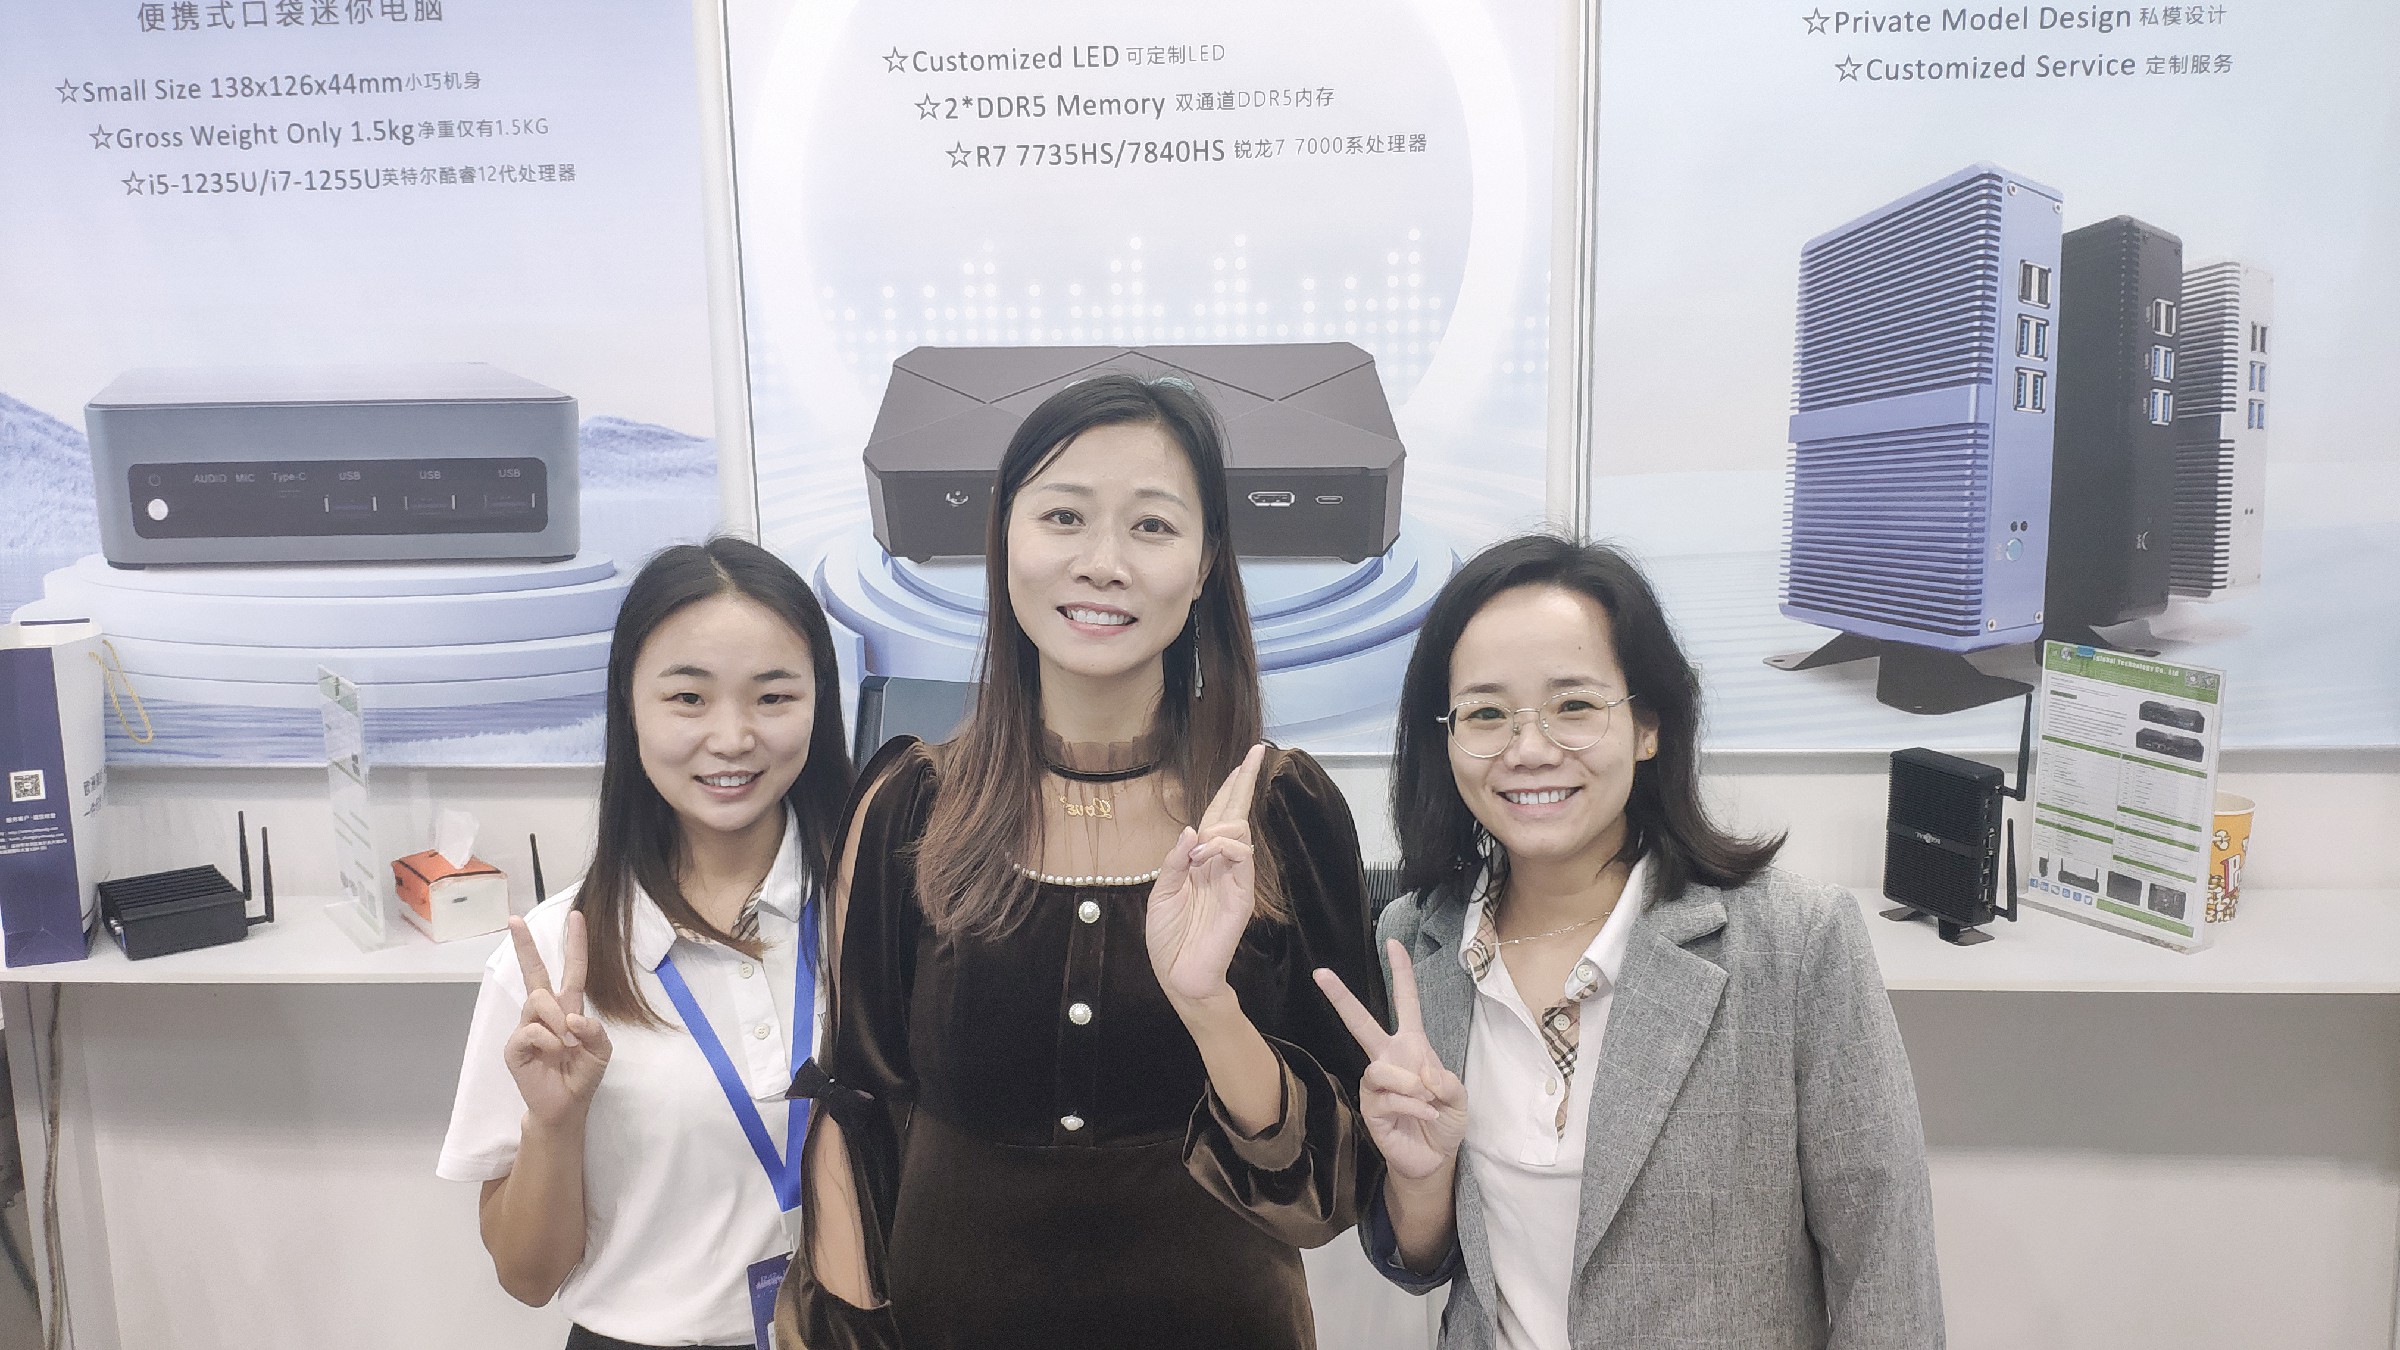 EGSMTPC Mini PC Manufacturer Attends 12.12 Foreign Trade Exhibition In Futian,Shenzhen(图2)